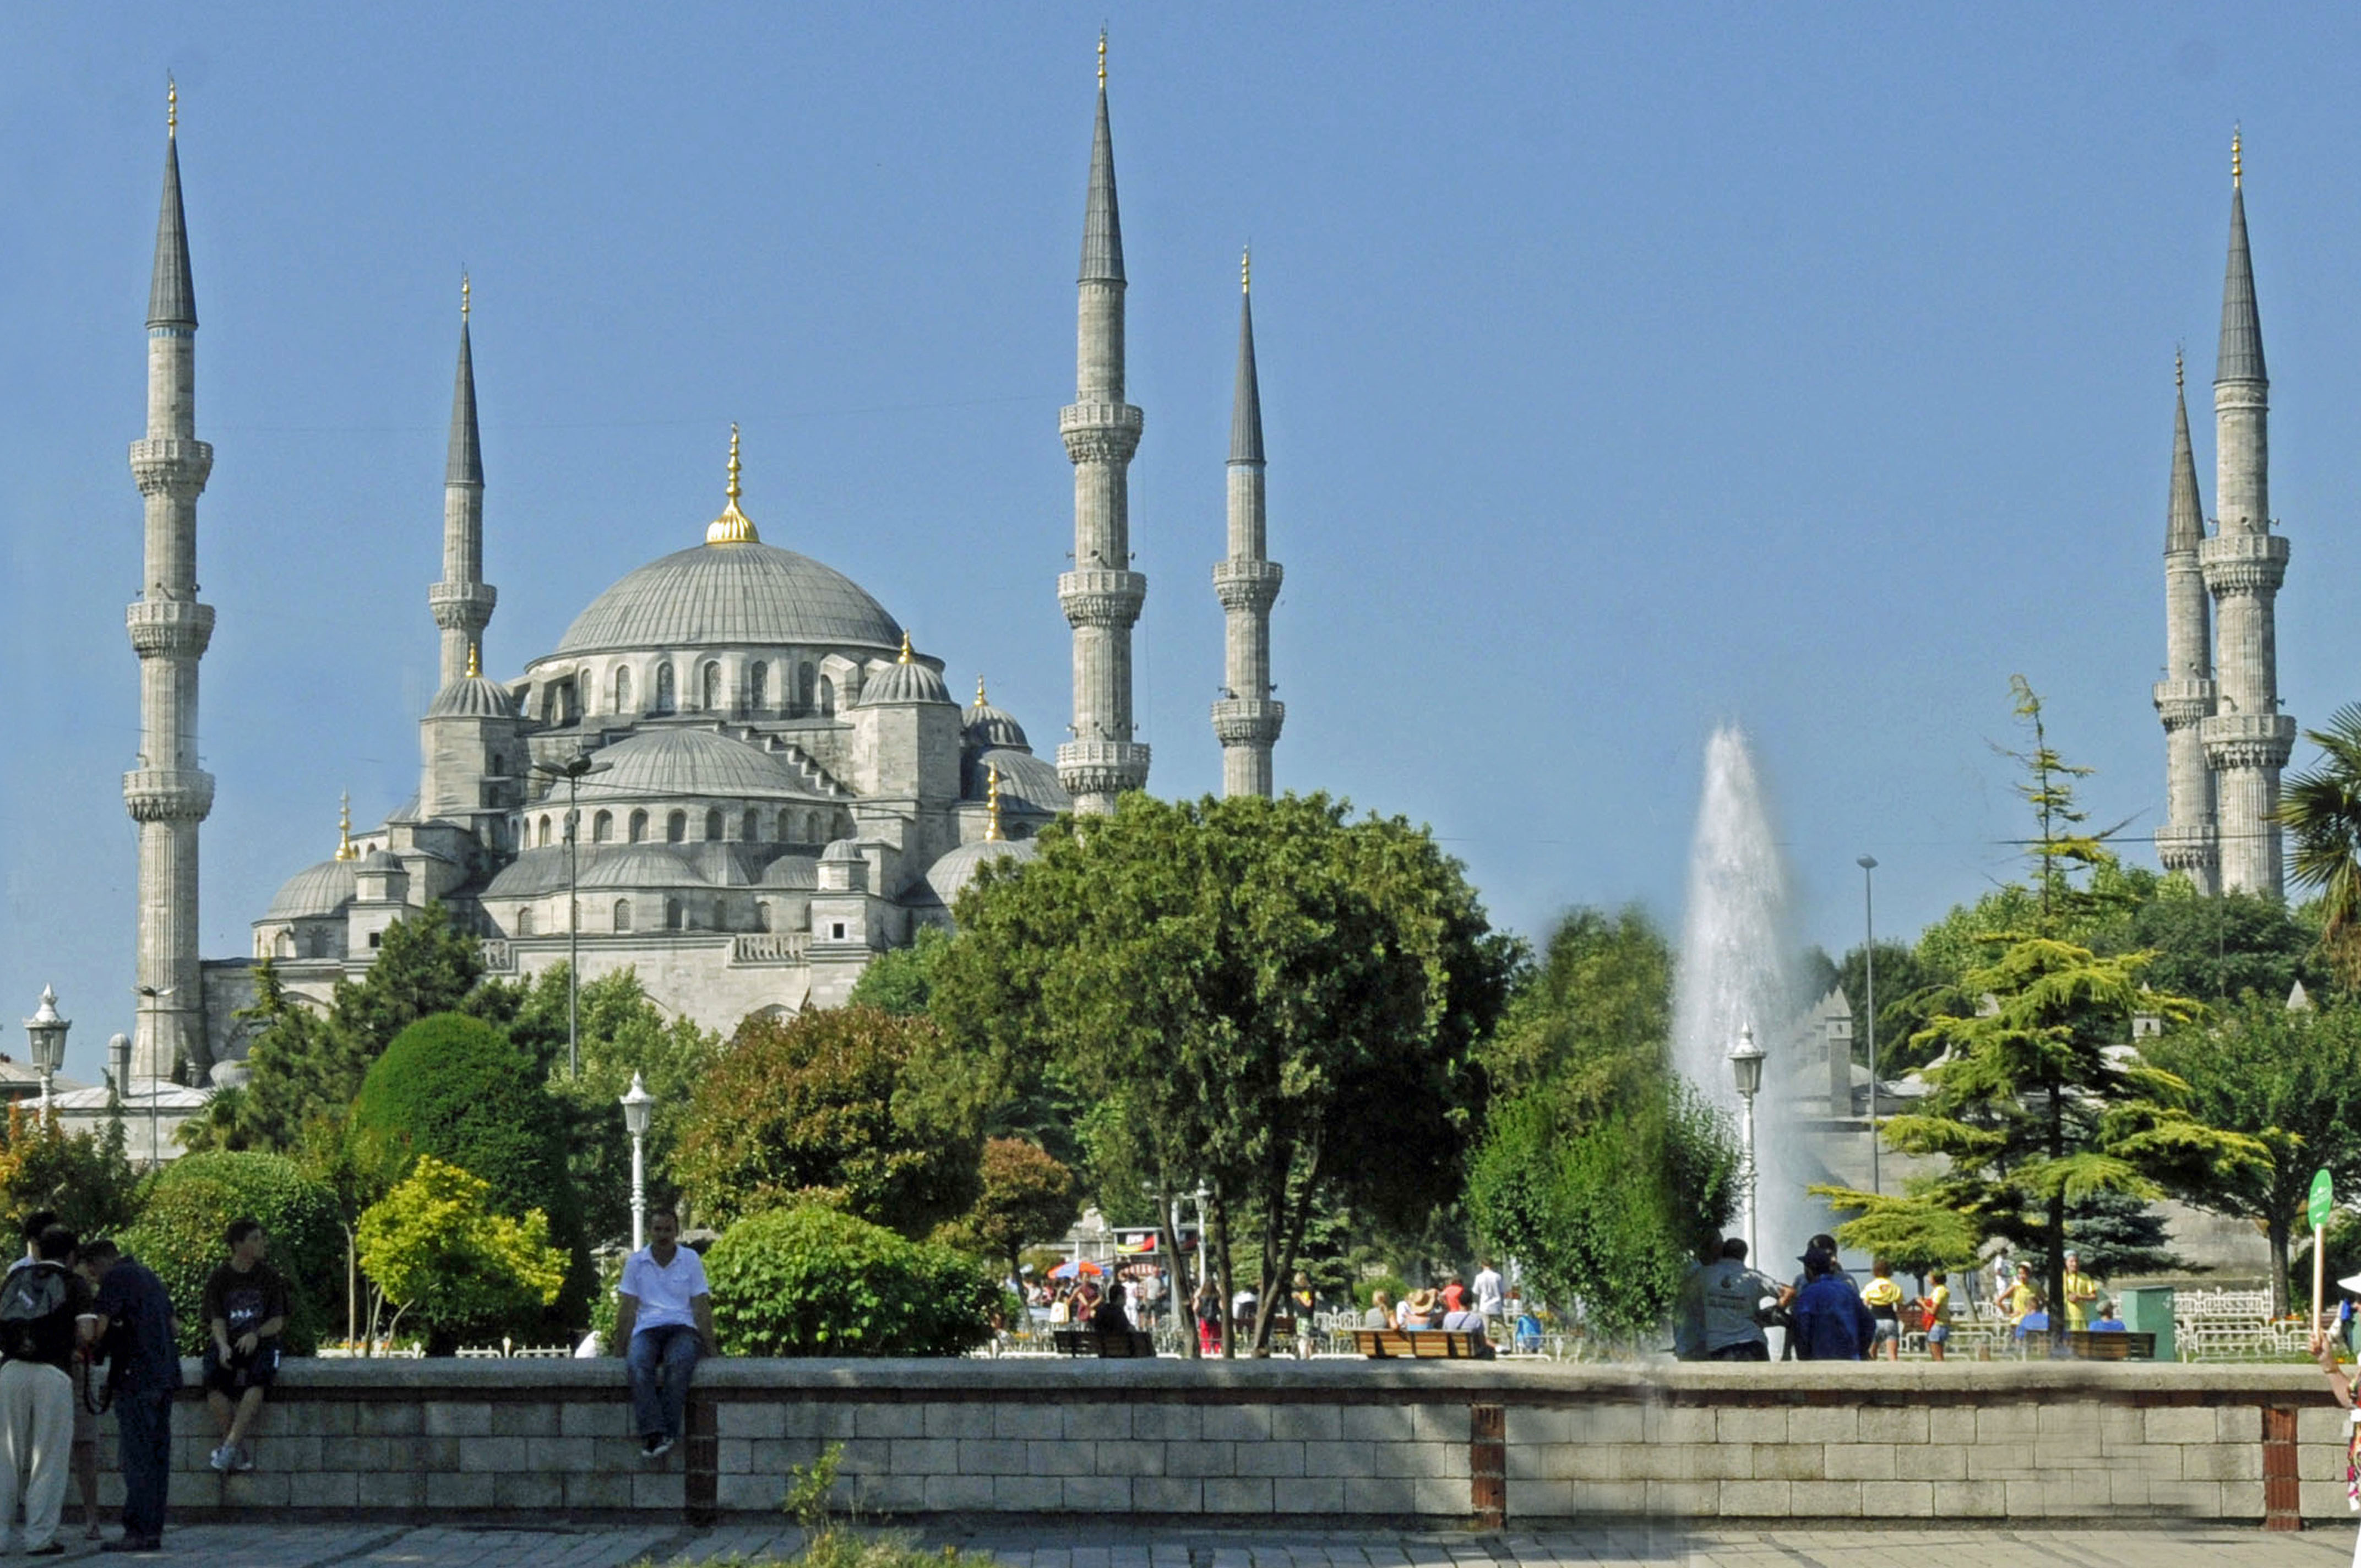 The Blue Mosque in Istanbul, Turkey (Photo by Don Knebel)